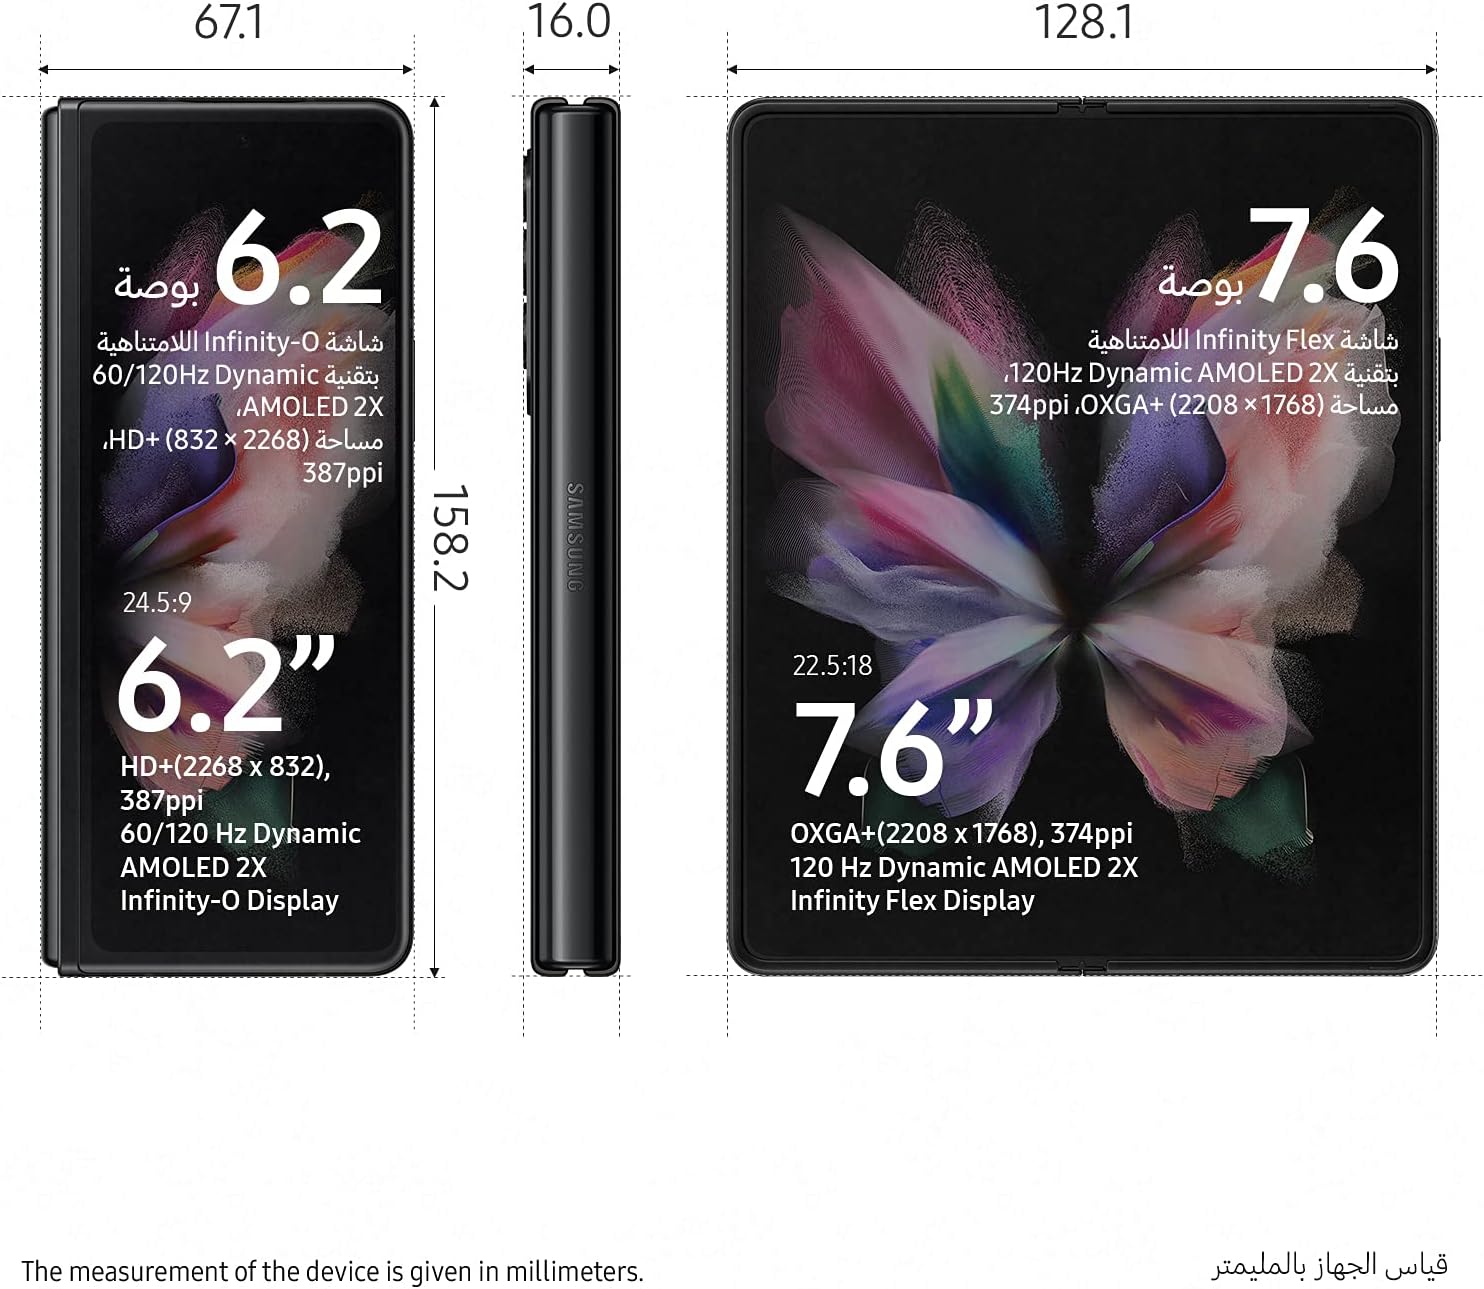 Dual display smartphone with 7.6-inch Infinity Flex AMOLED 2X foldable display - Great views inside out in SAMSUNG Galaxy Z Fold3 5G. 8806092562387